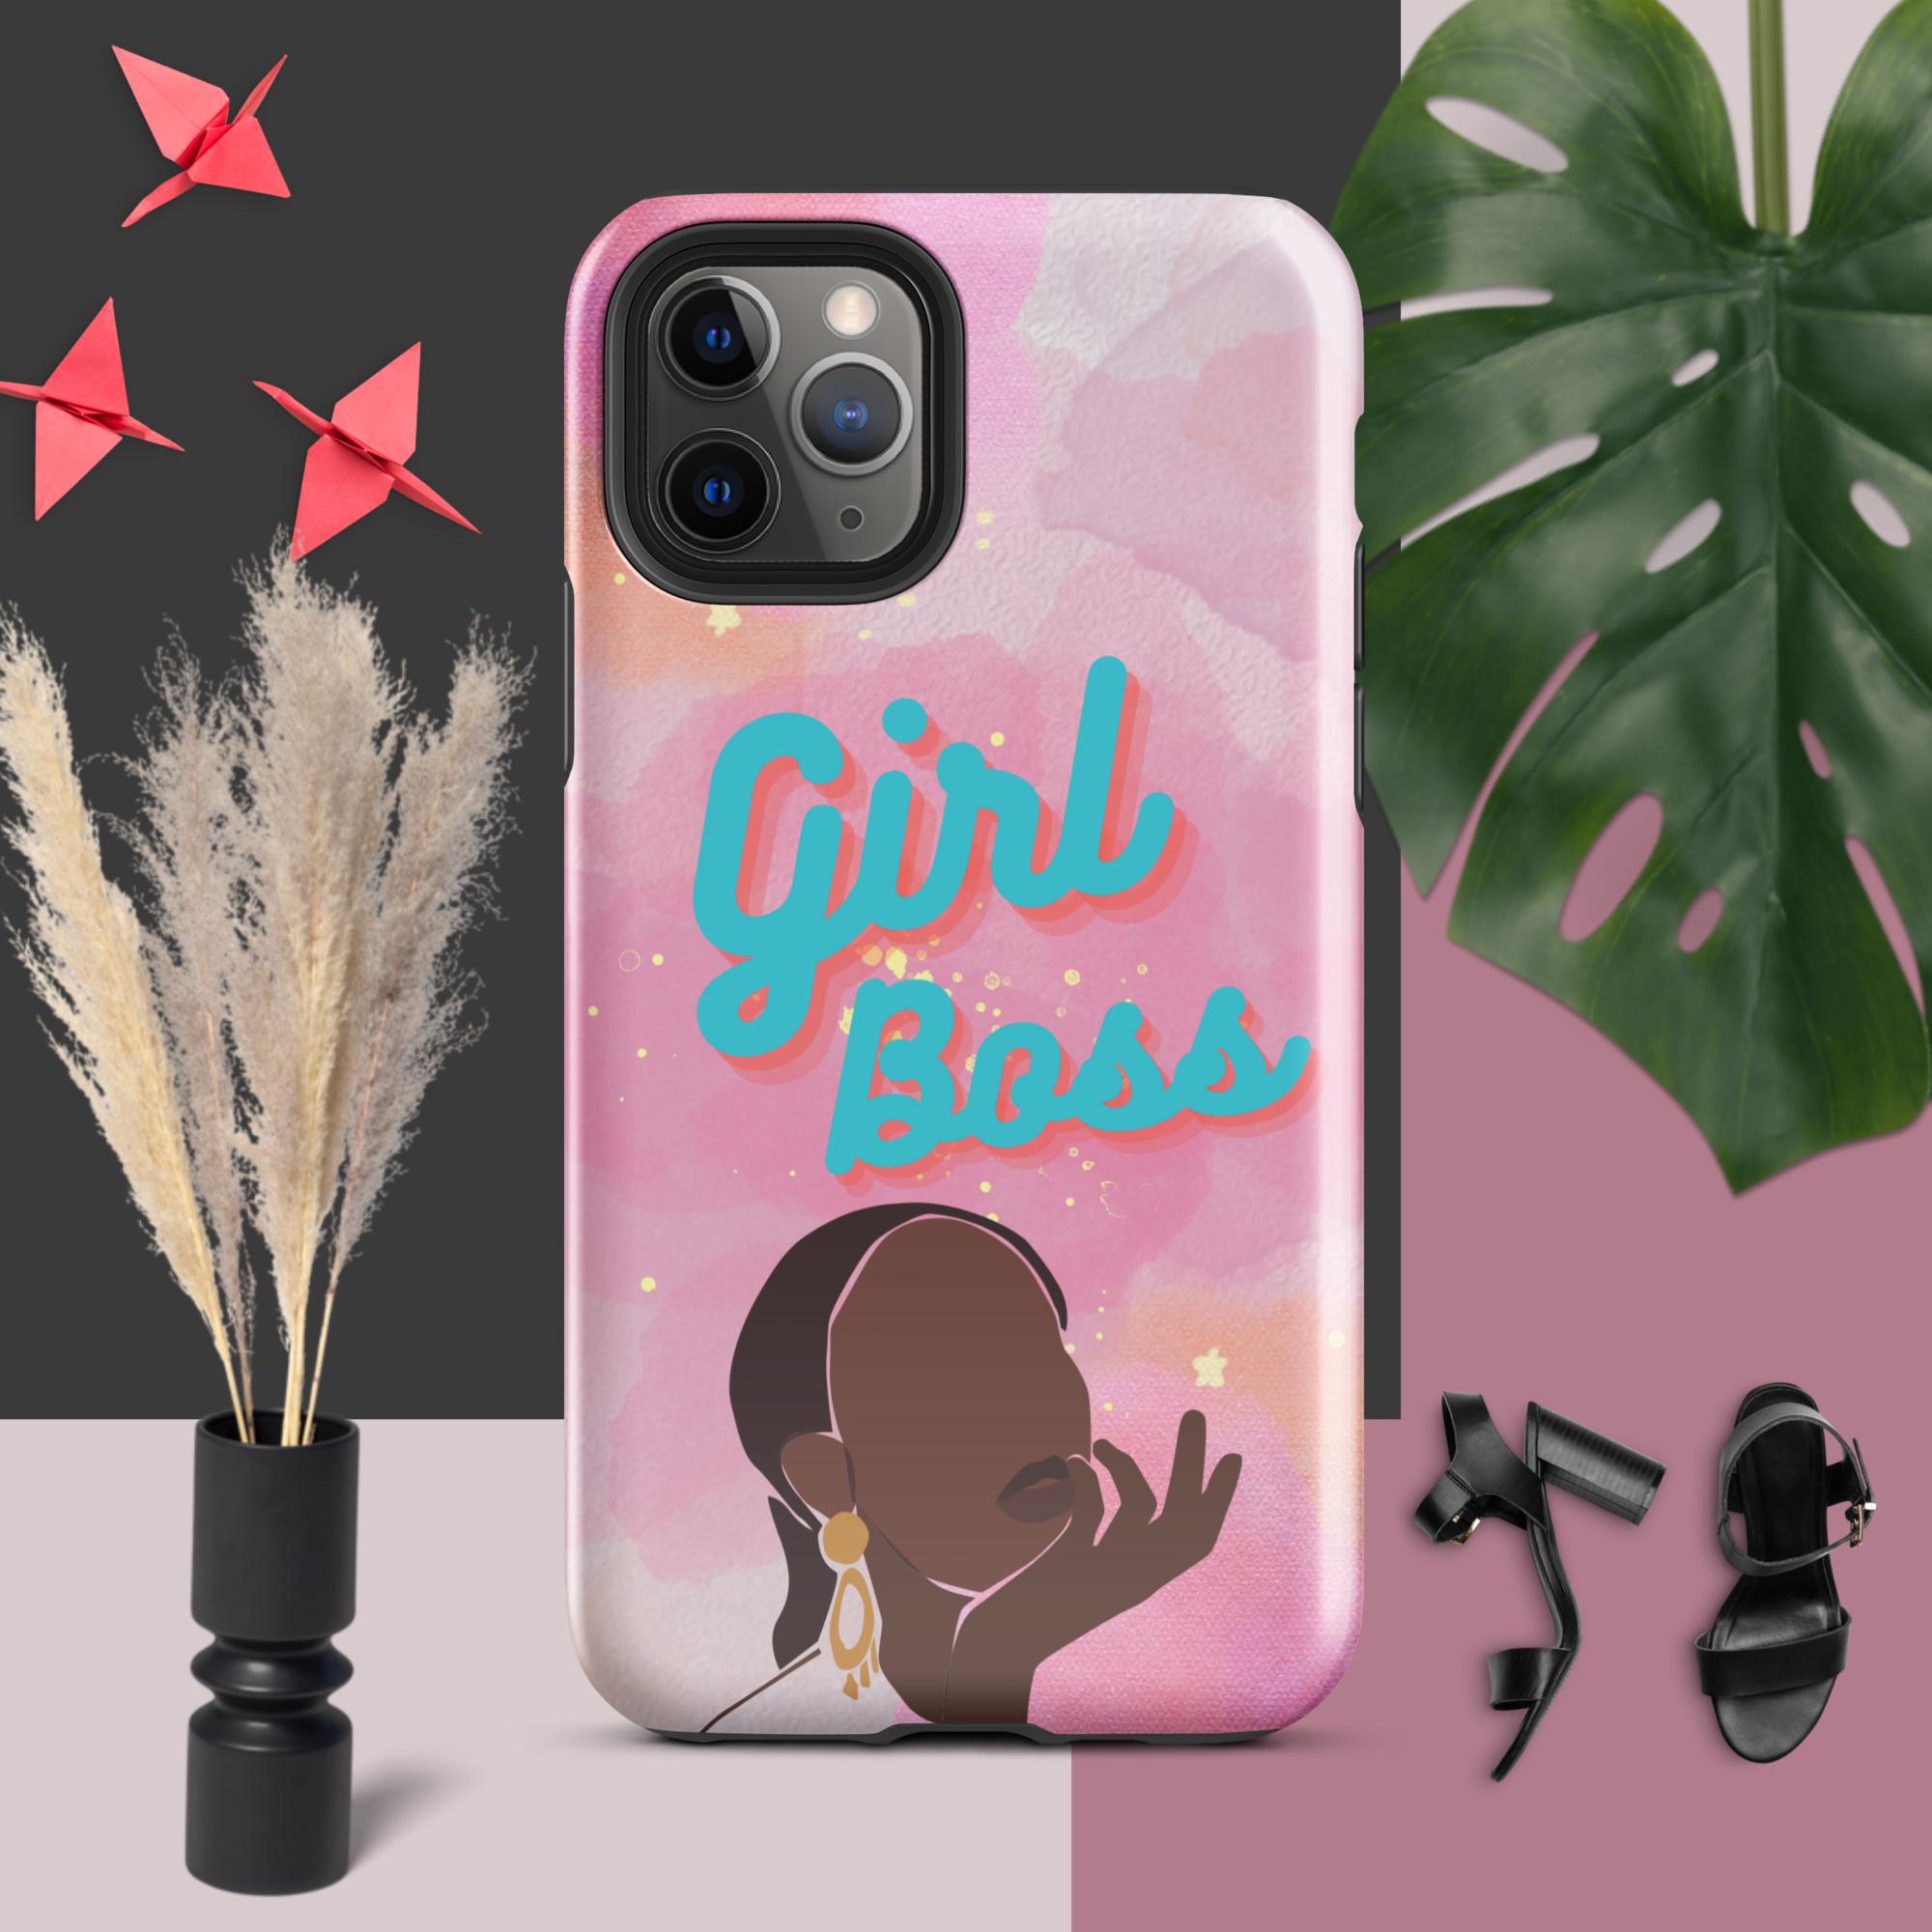 She is a Boss -Iphone Case